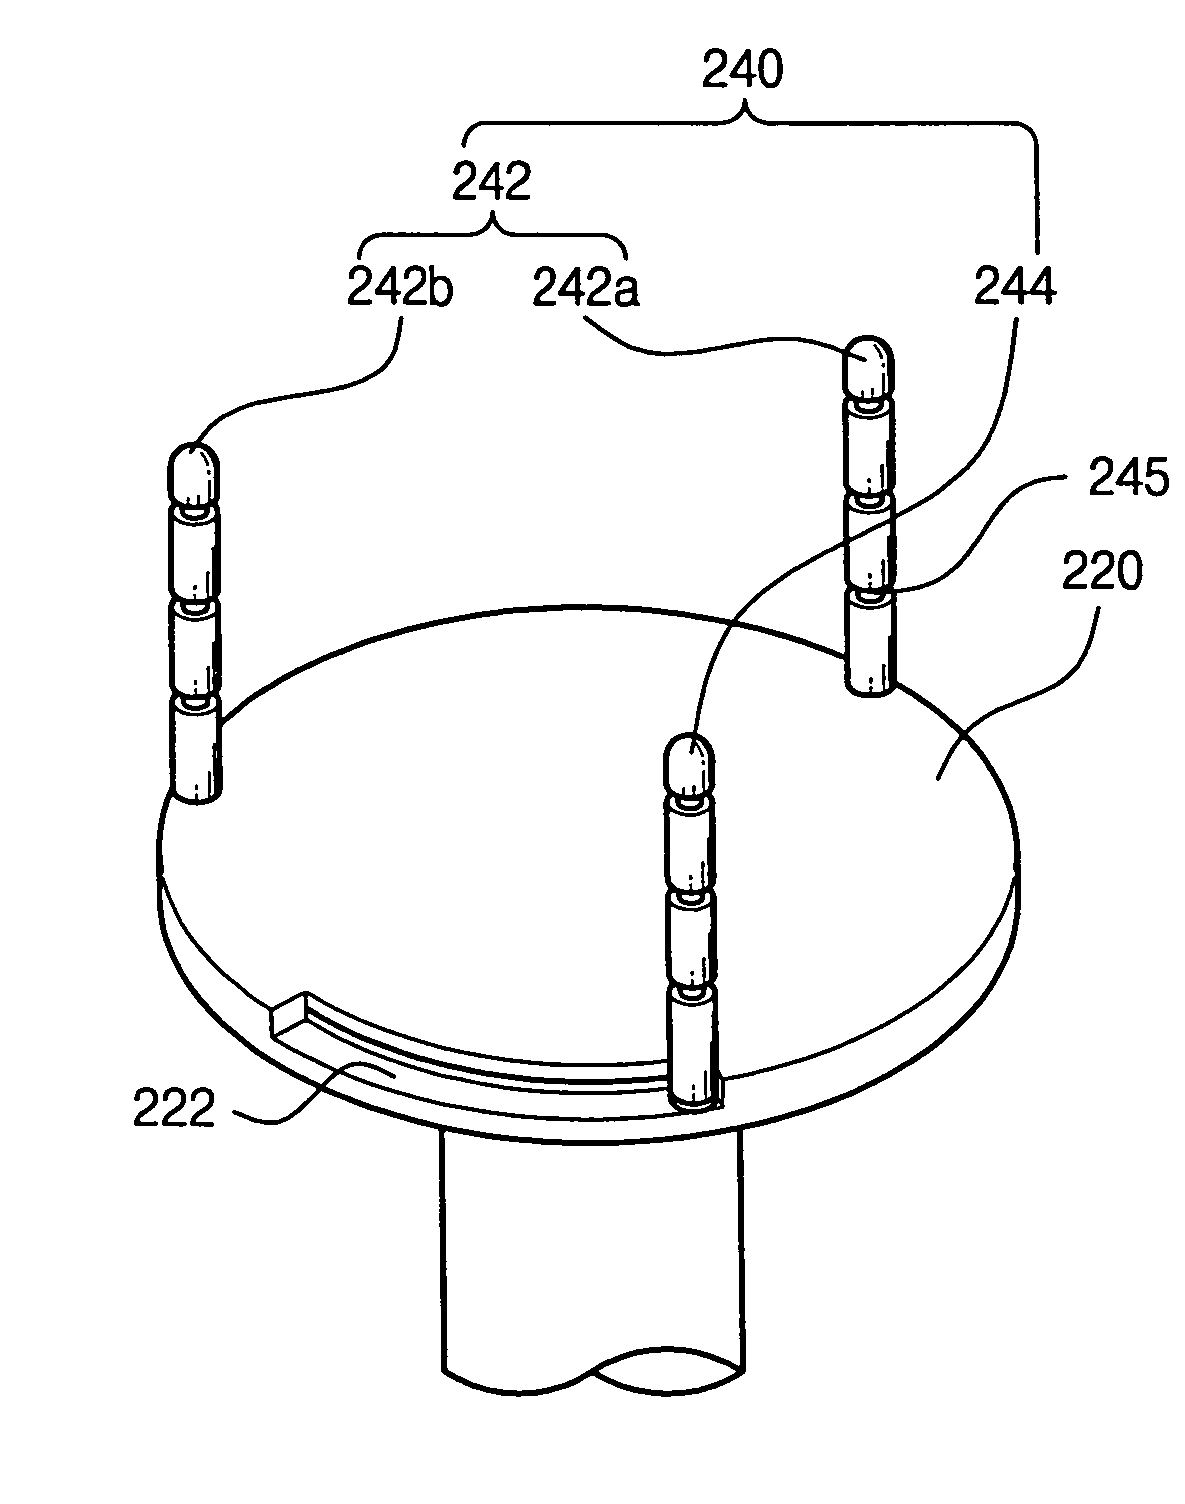 Apparatus for and method of cleaning substrates